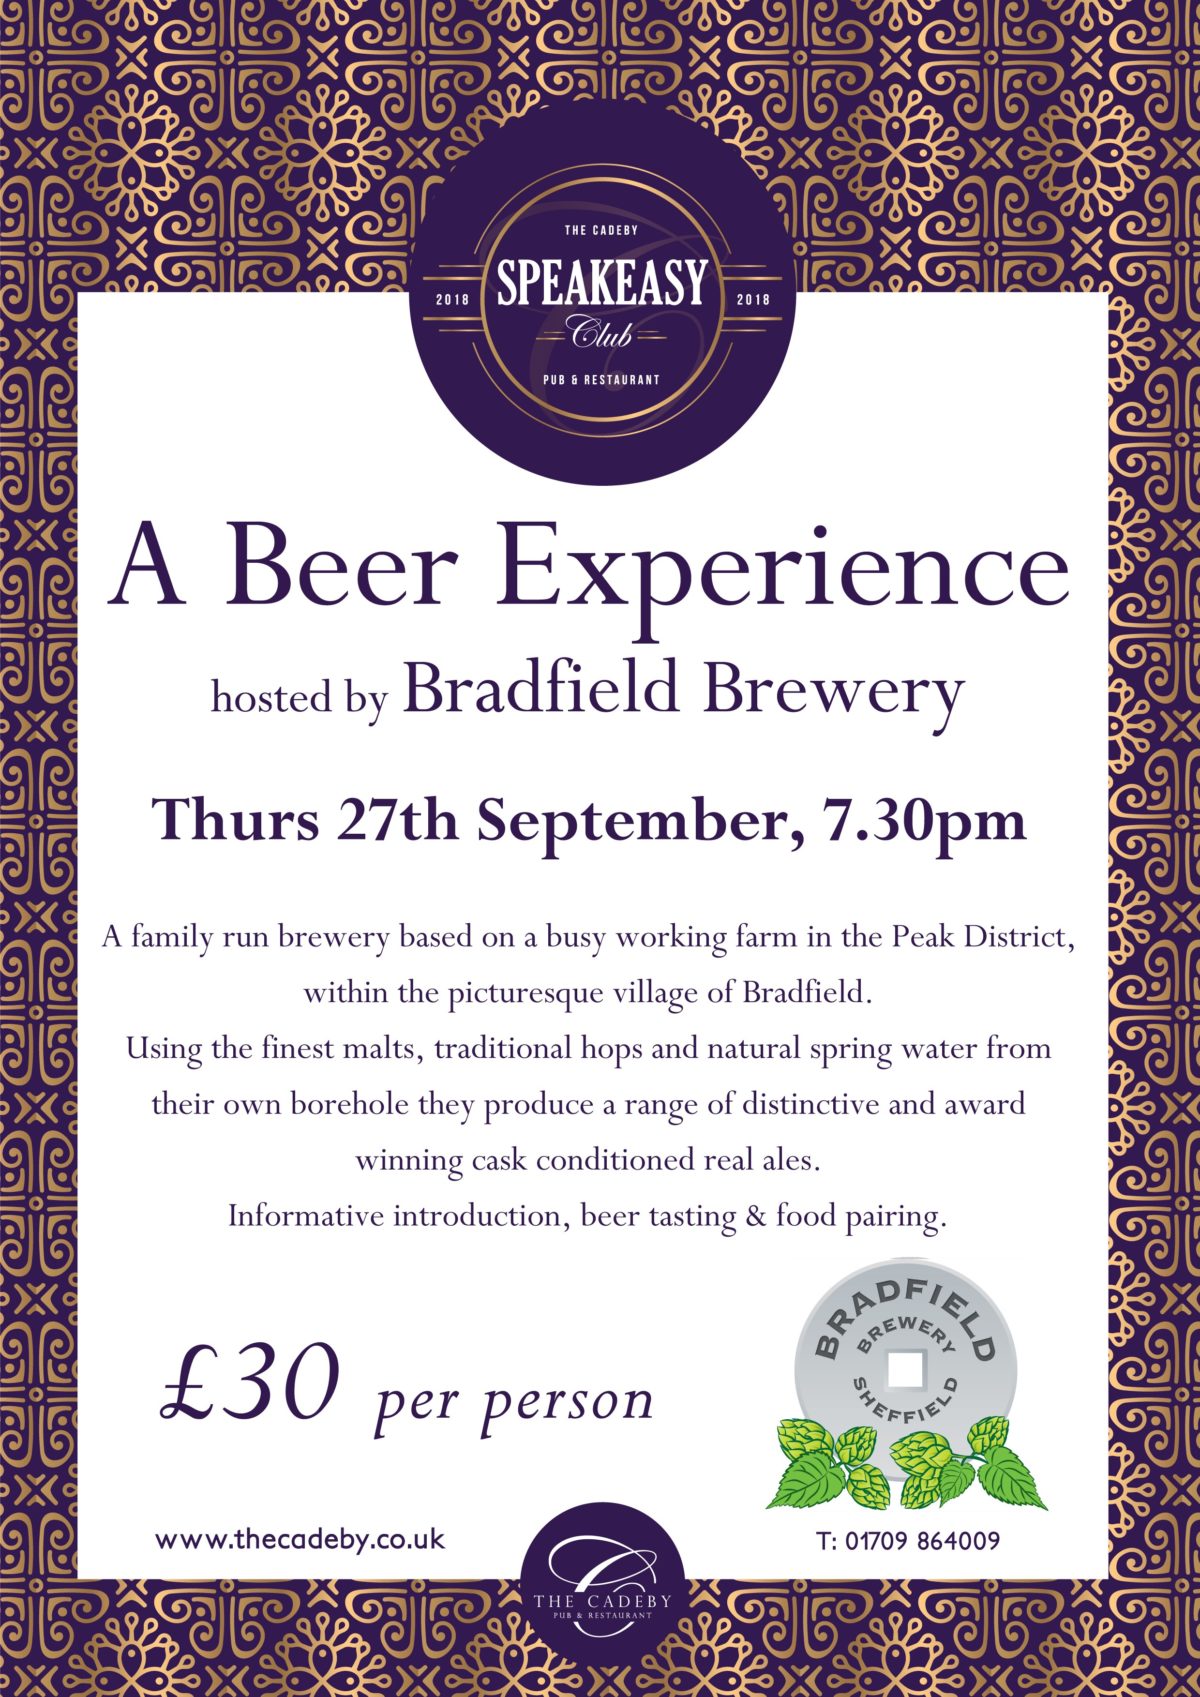 A Beer Experience at The Cadeby with Bradfield Brewery